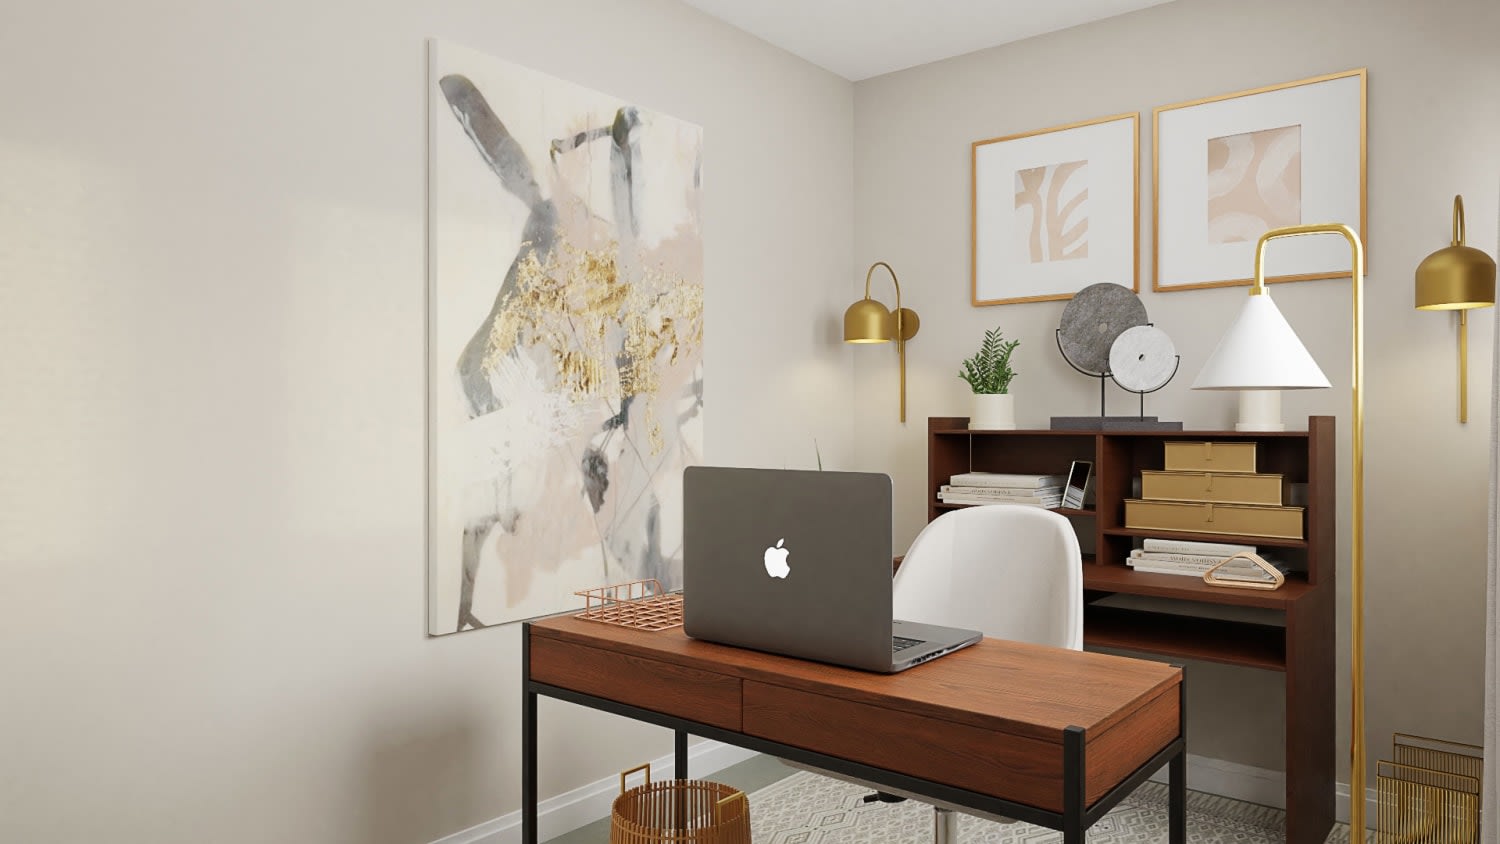 Learn with Spacejoy: How to add more color to my home office? | Design ...